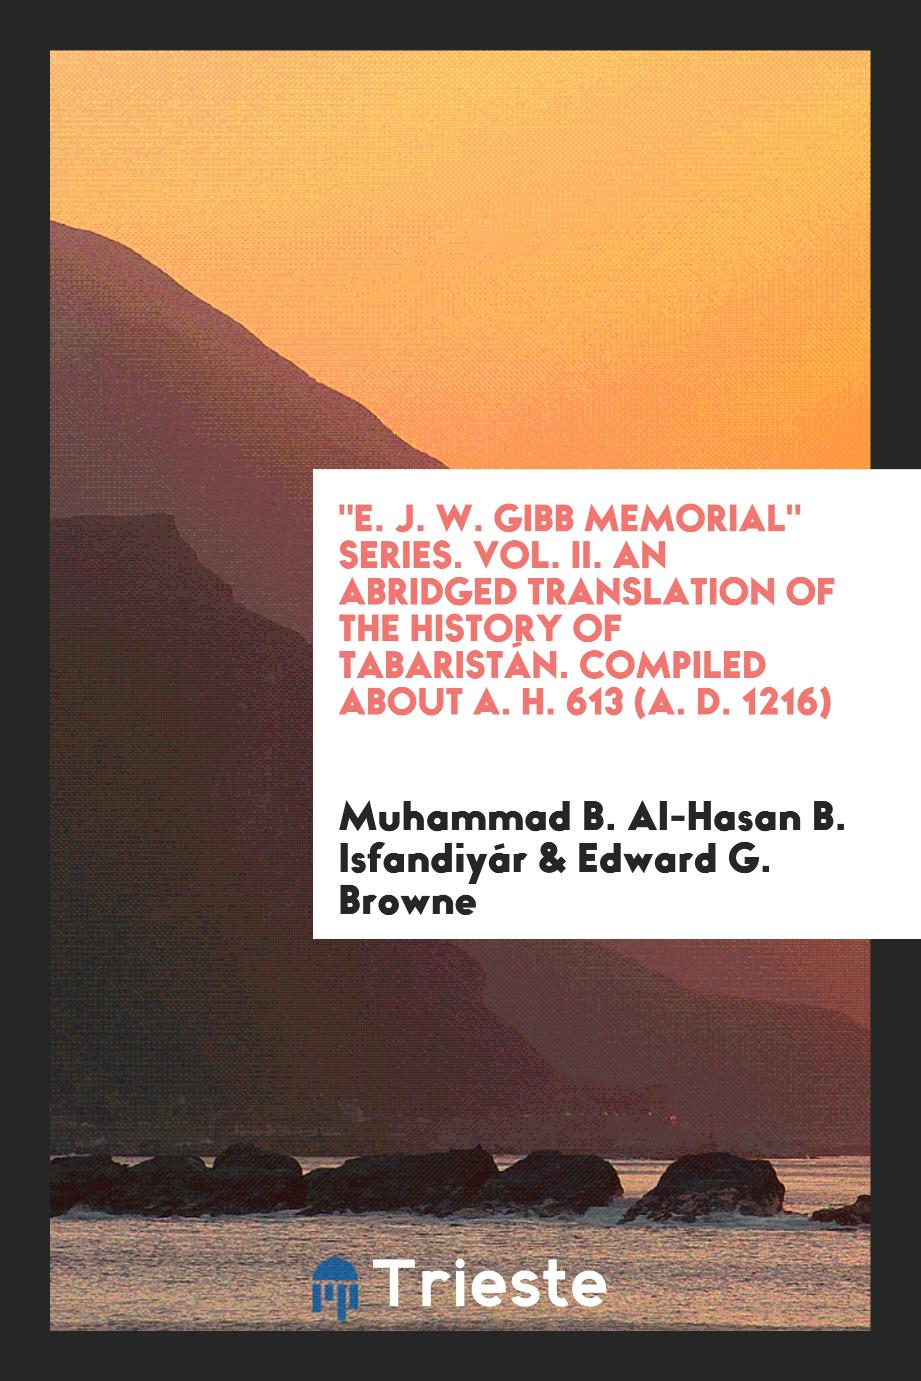 "E. J. W. Gibb Memorial" Series. Vol. II. An Abridged Translation of the History of Tabaristán. Compiled About A. H. 613 (A. D. 1216)